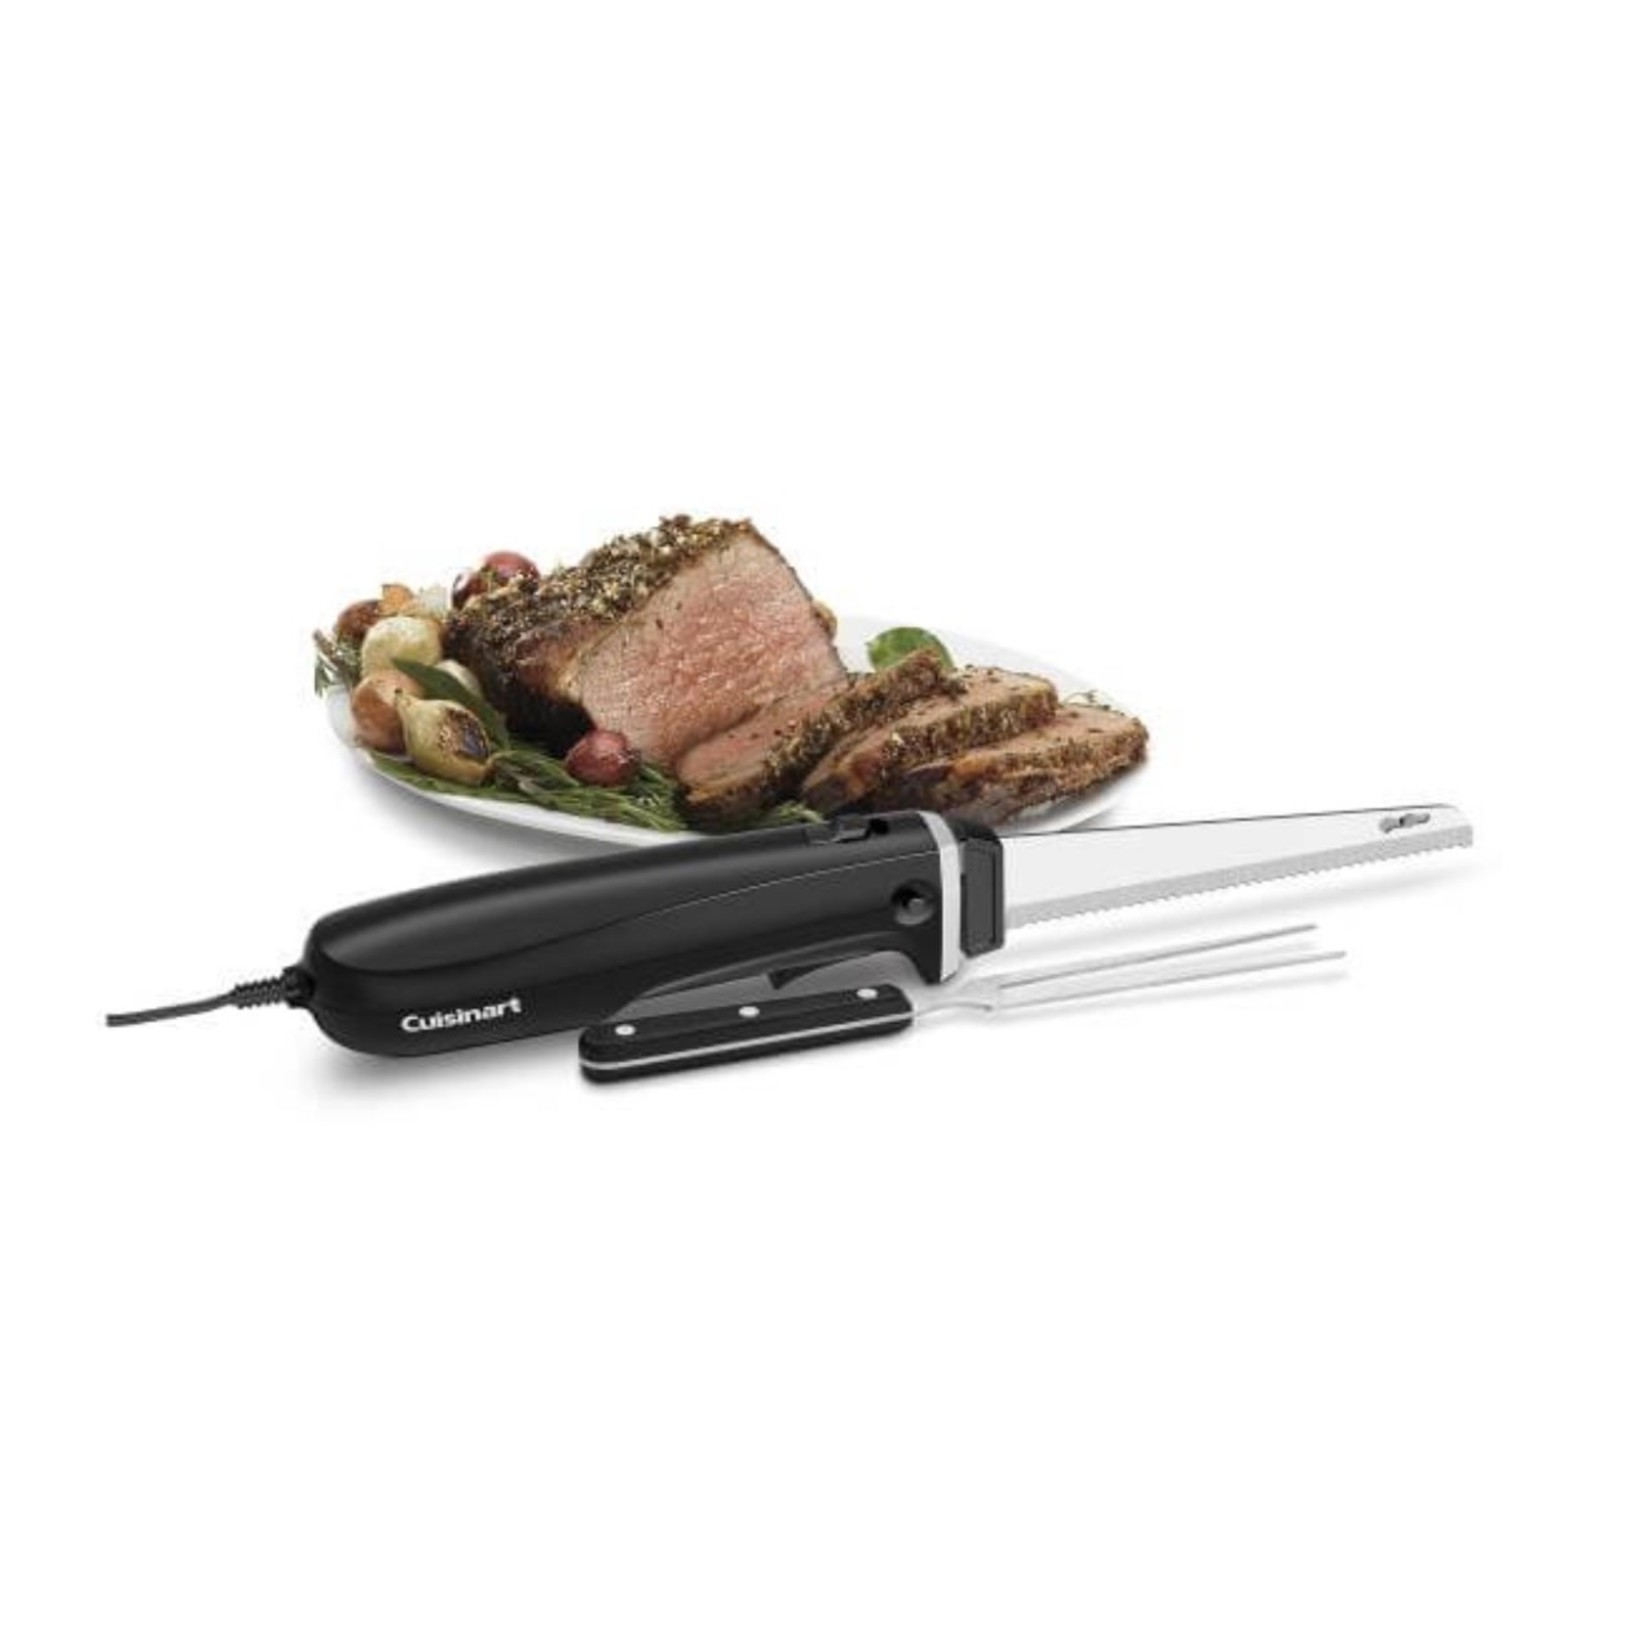 CUISINART CUISINART Electric Knife & Carving Fork Set with Block